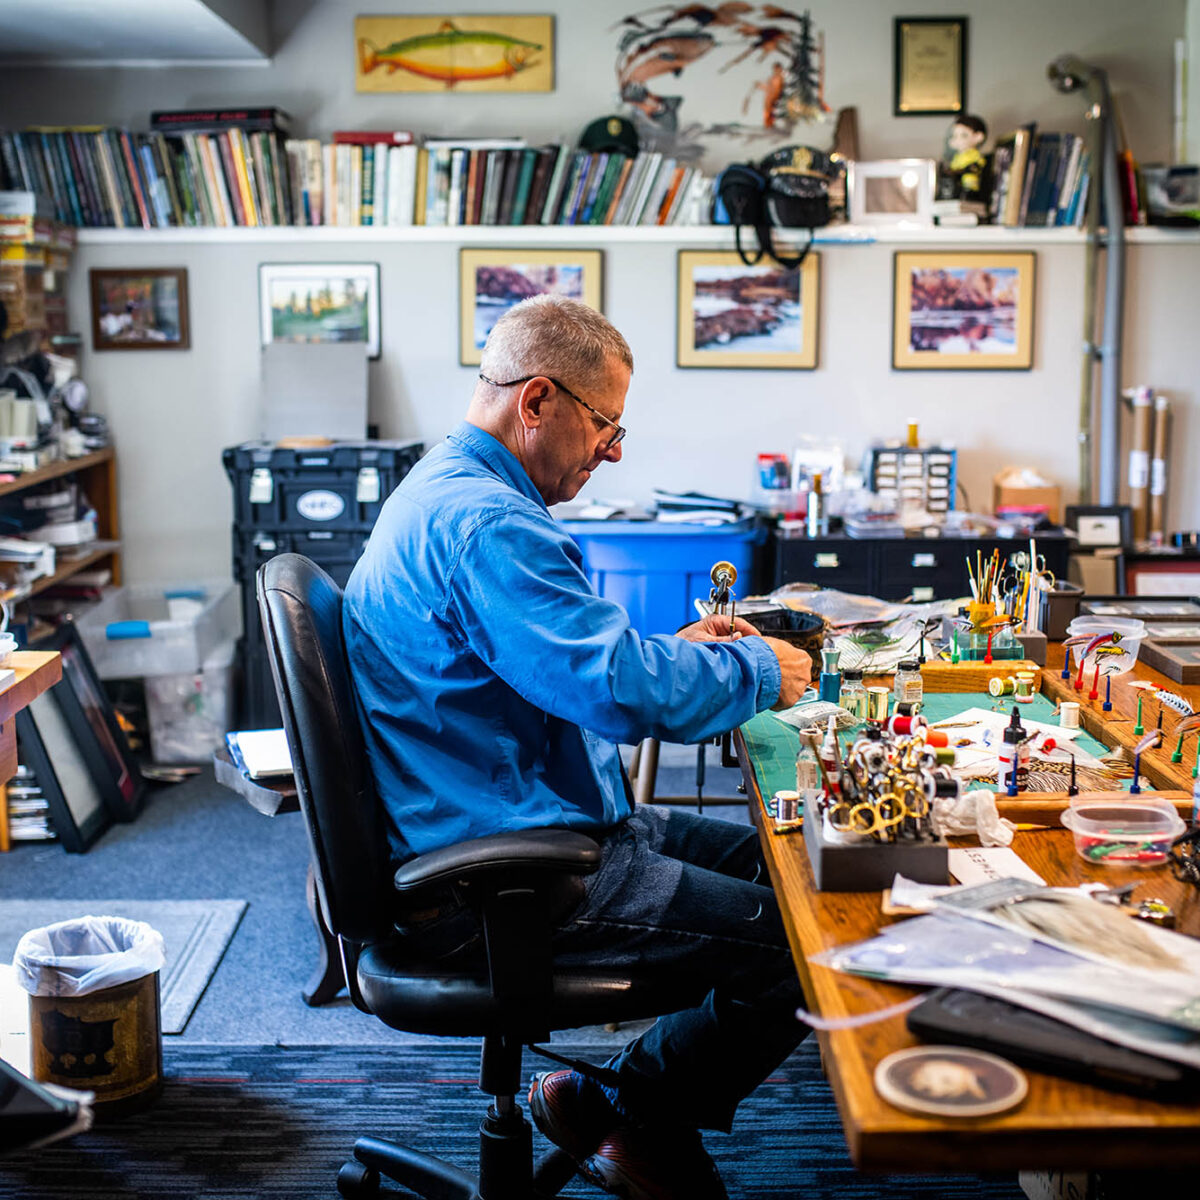 Video: Keeping the Ancient—and Secretive—Art of Fly Tying Alive